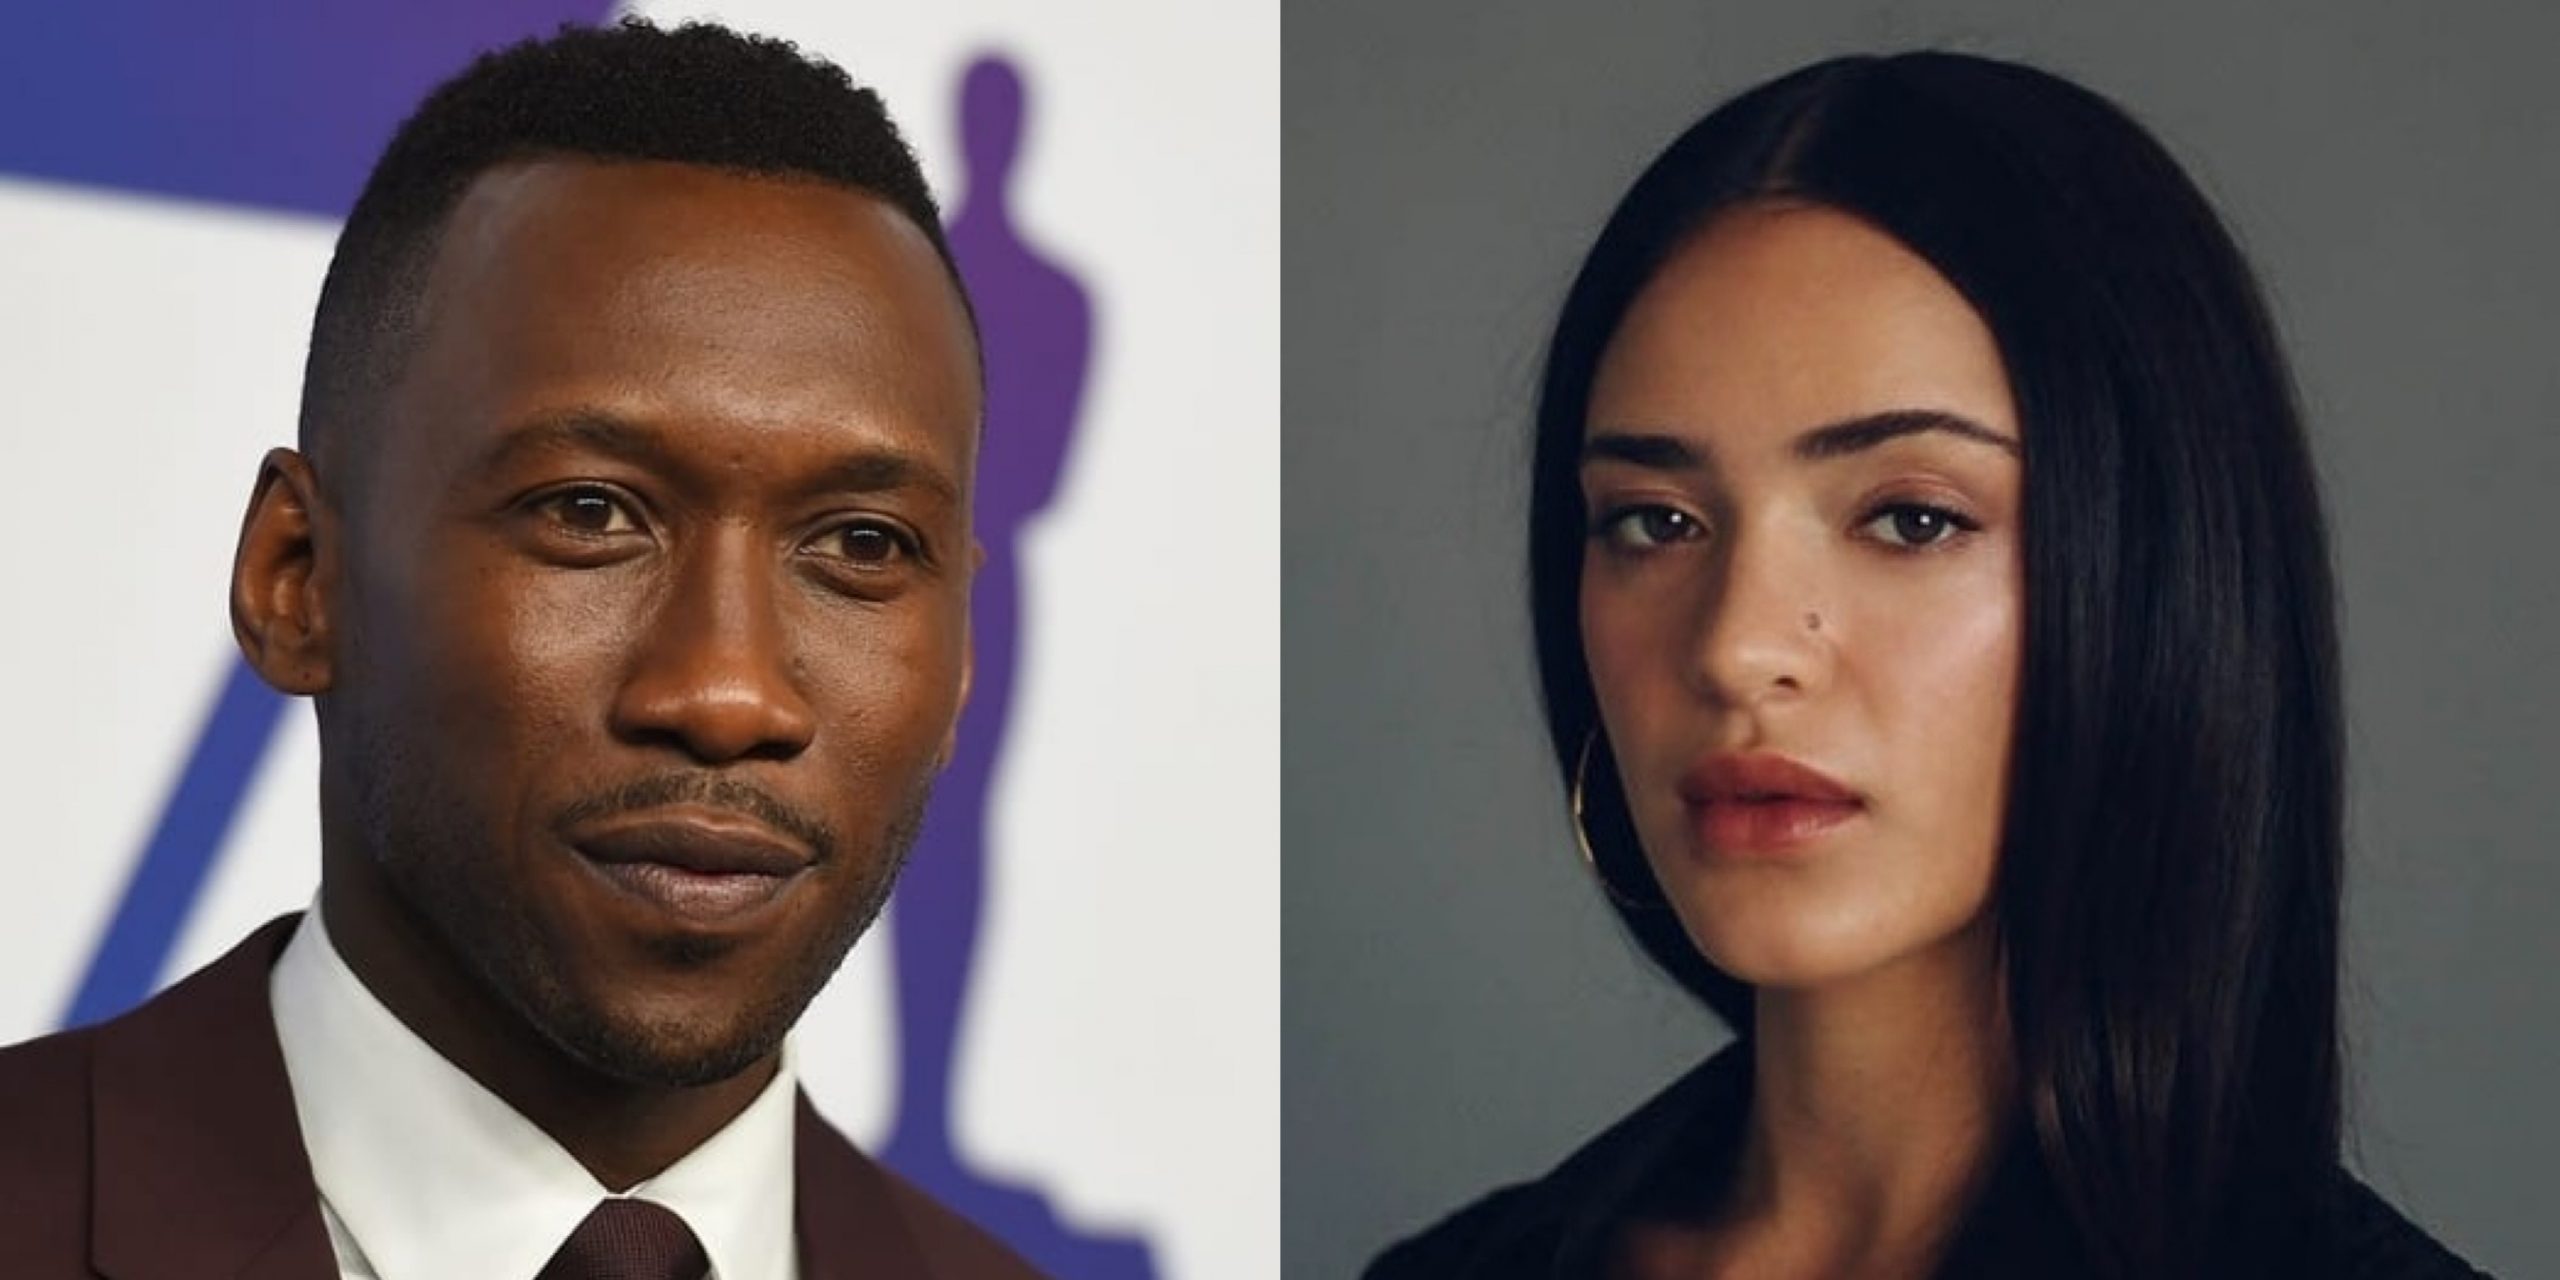 Mahershala Ali and Luna Blaise In Talks for Key Roles In Jurassic World 4